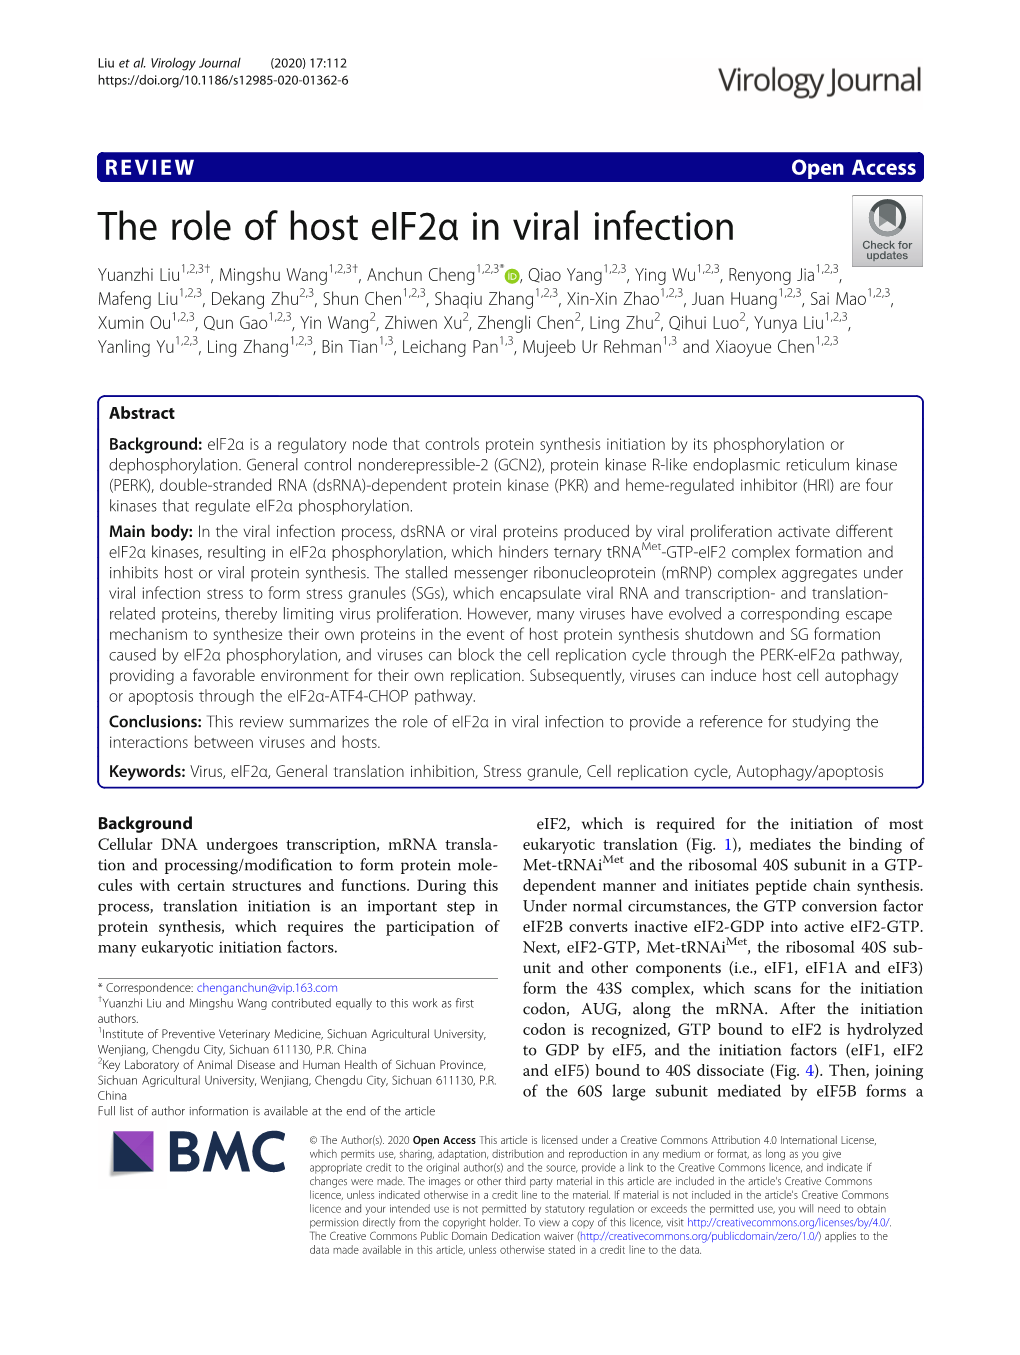 The Role of Host Eif2α in Viral Infection